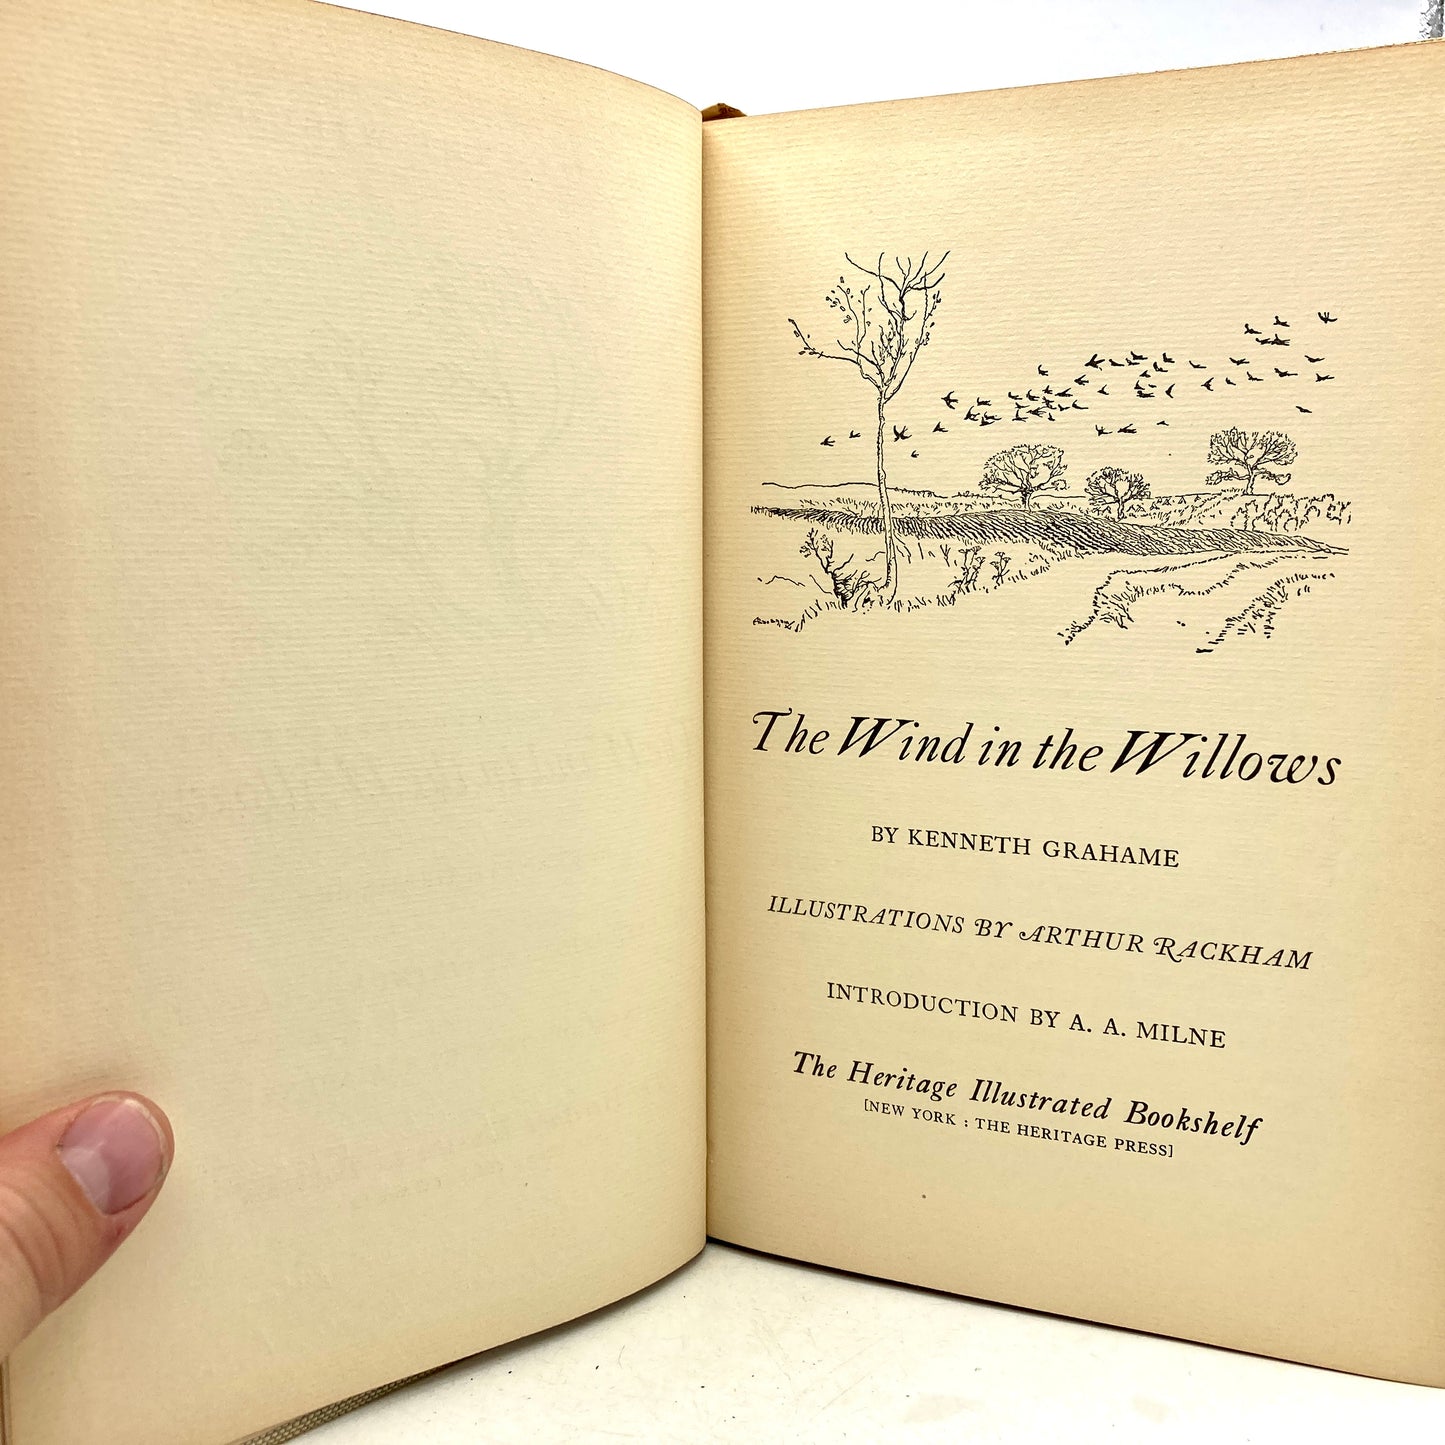 GRAHAME, Kenneth "The Wind in the Willows" [Heritage Press, 1954] Arthur Rackham